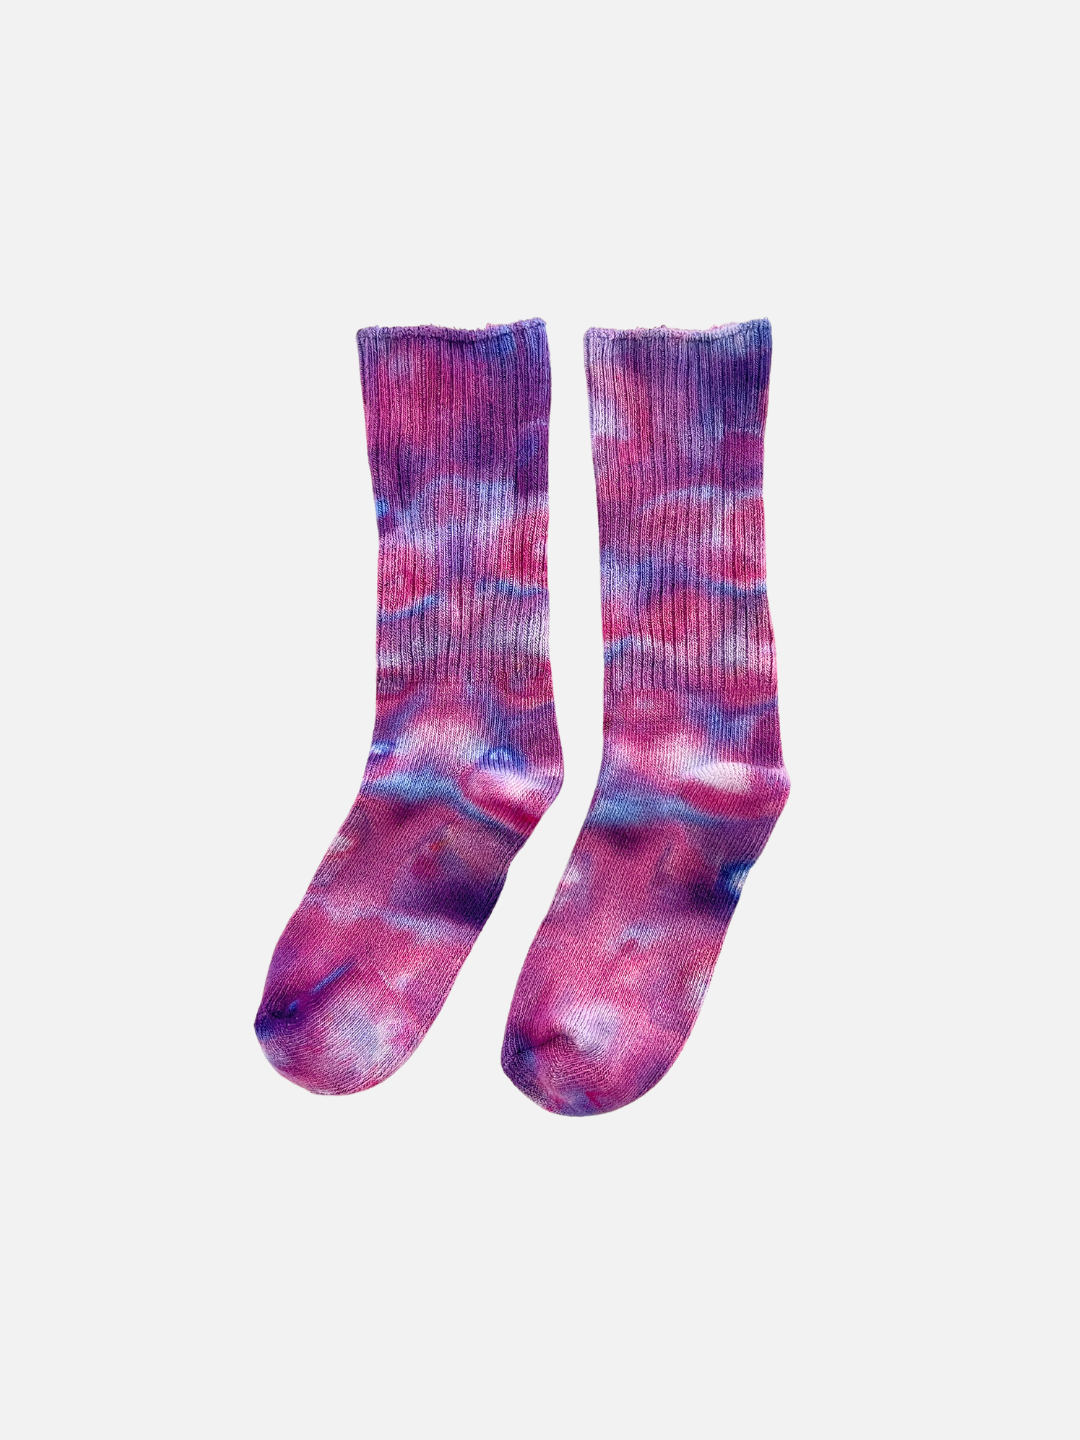 Ultraviolet | A pair of kids' ankle socks in dappled shades of purple and pink